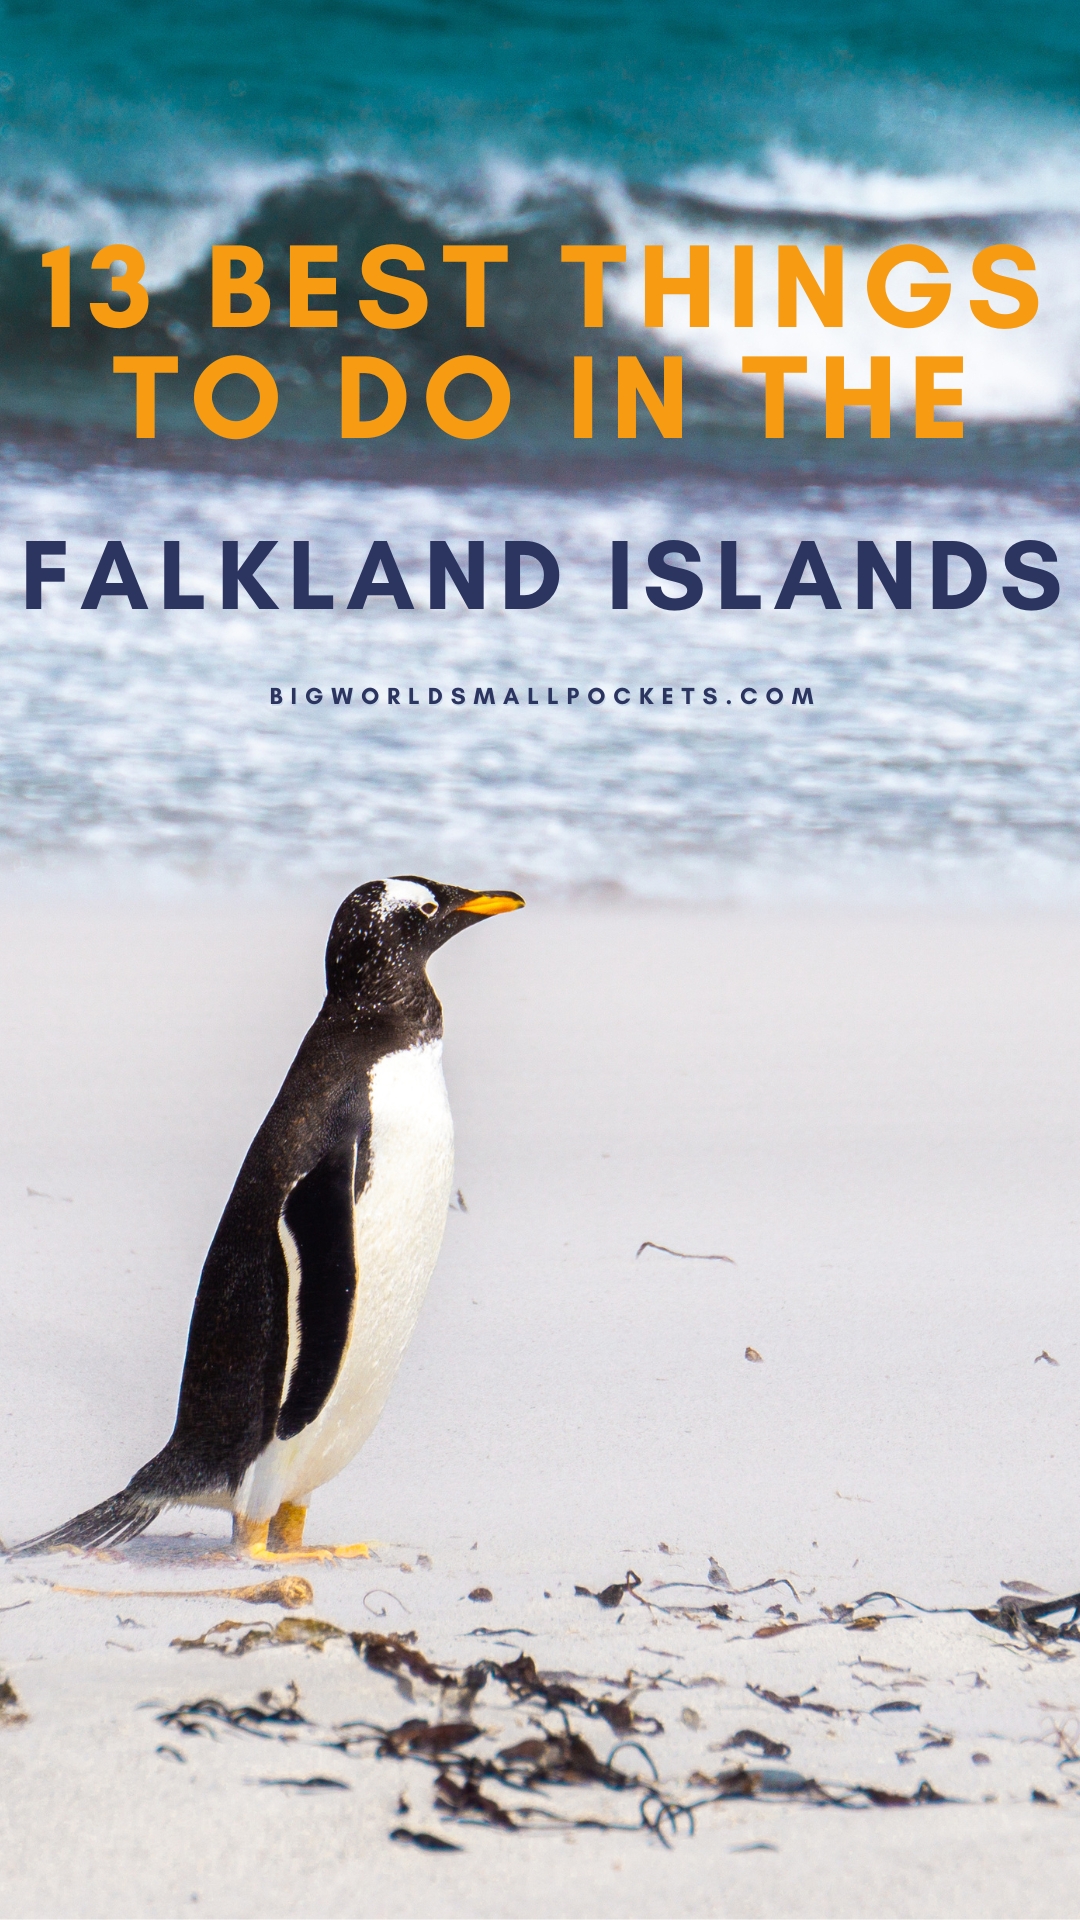 Top 13 Things to Do in the Falklands Islands